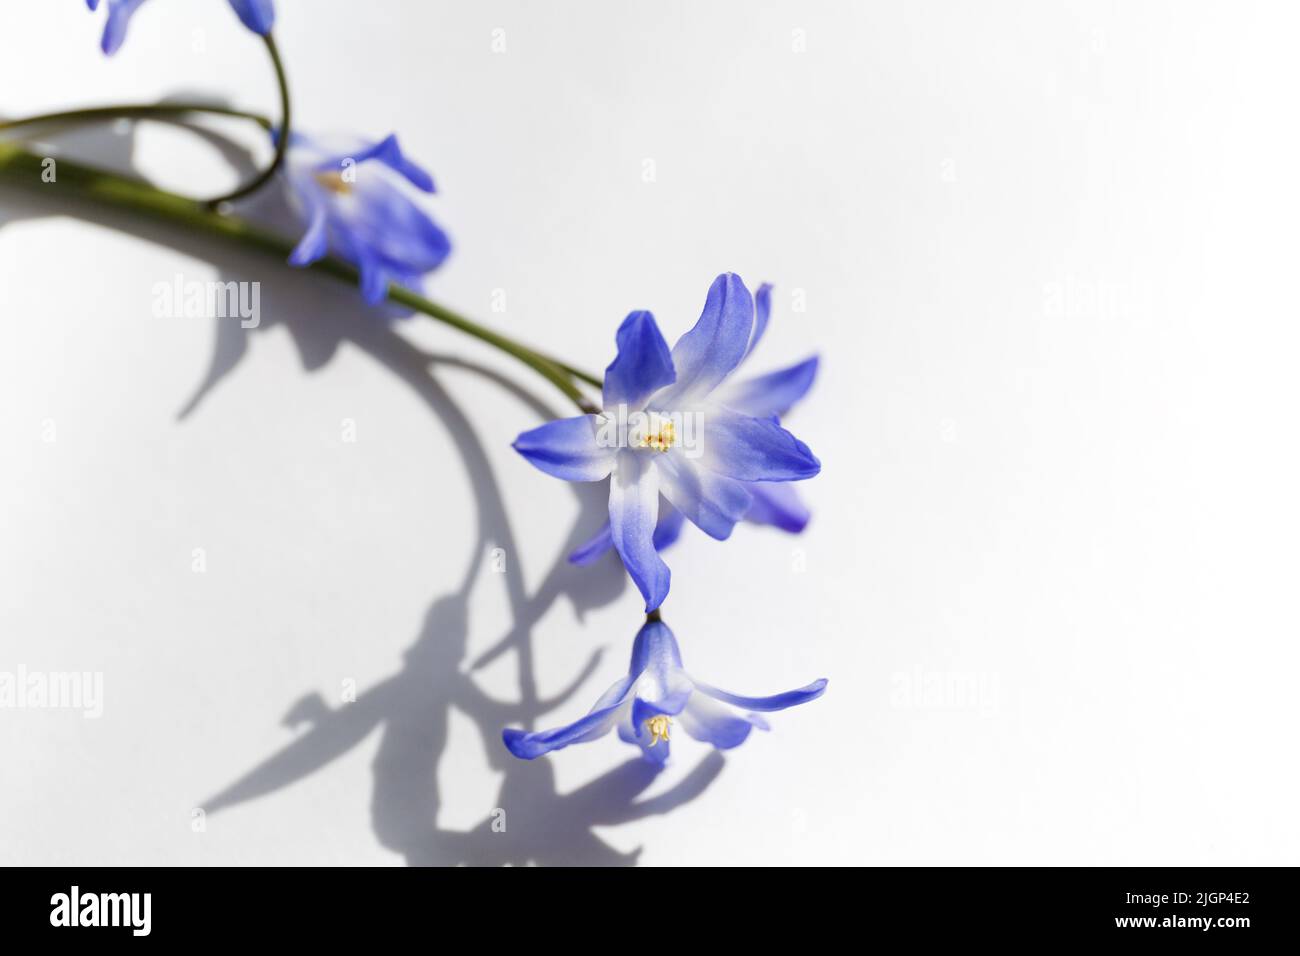 Close up of Glory-of-the-snow flowers (Chionodoxa luciliae). Blue spring flowers in bloom in the form of colorful stars. Selective focus Stock Photo